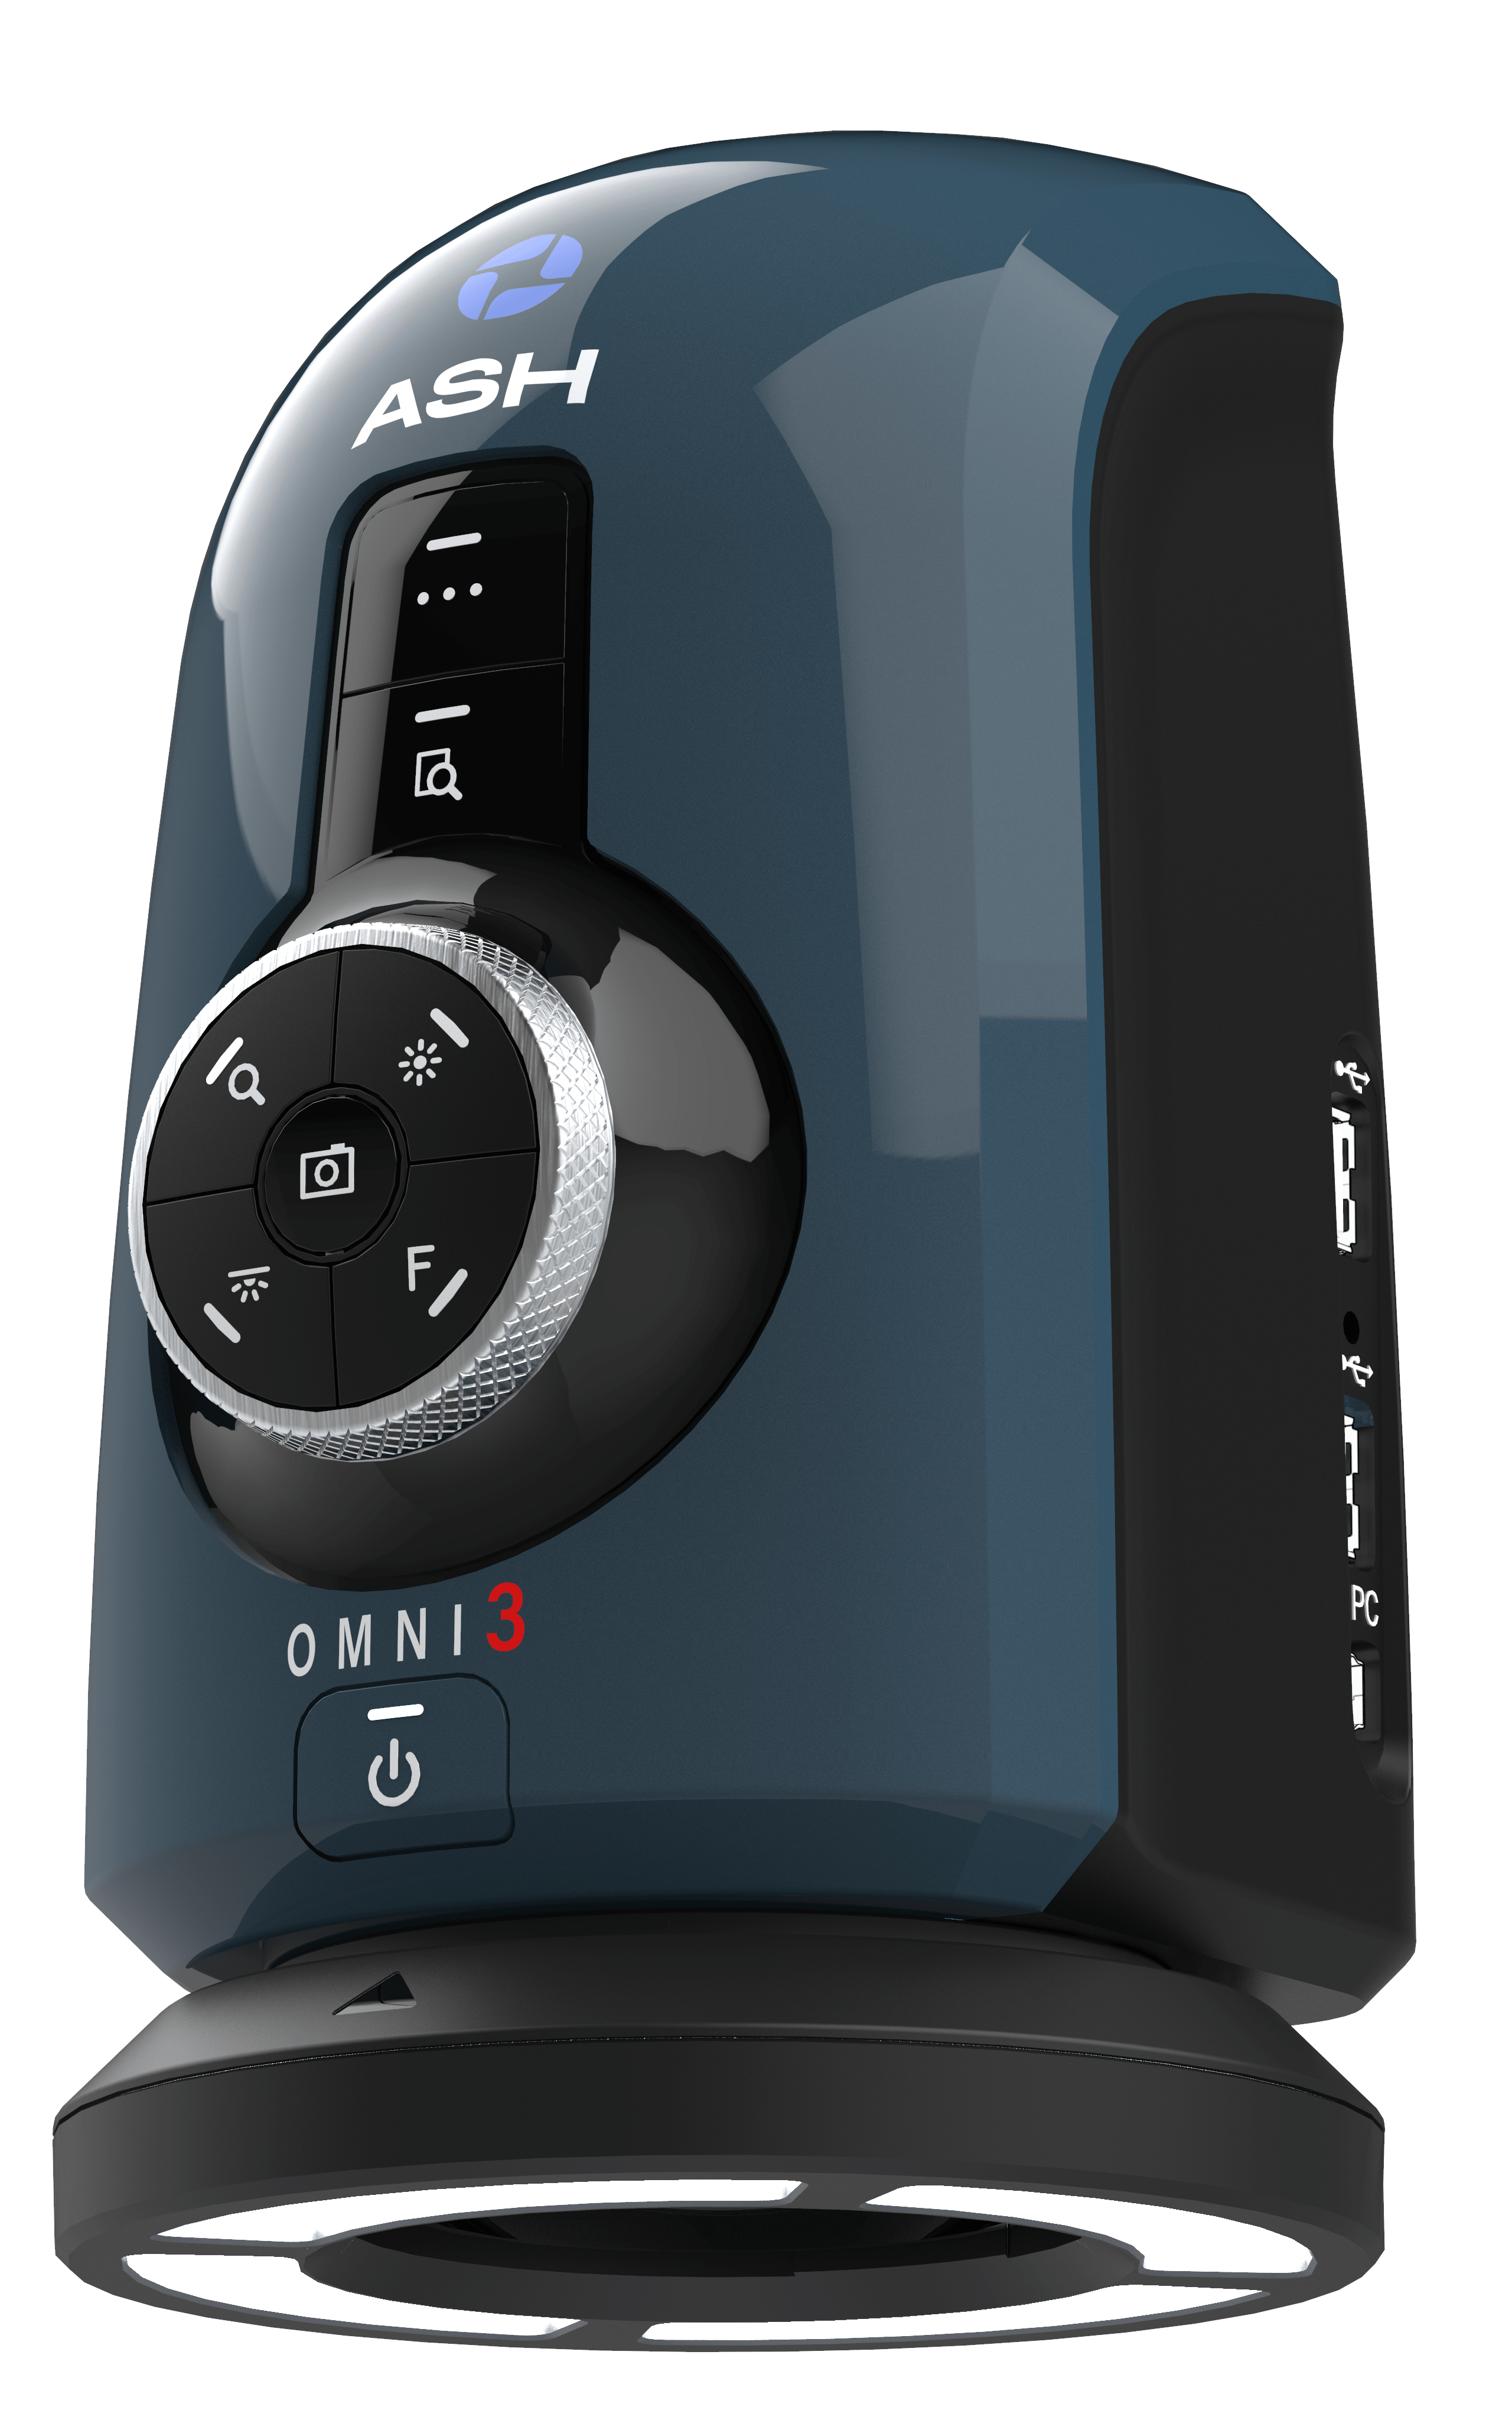 Omni 3 Microscope’s embedded software means tasks can be easily performed without a PC